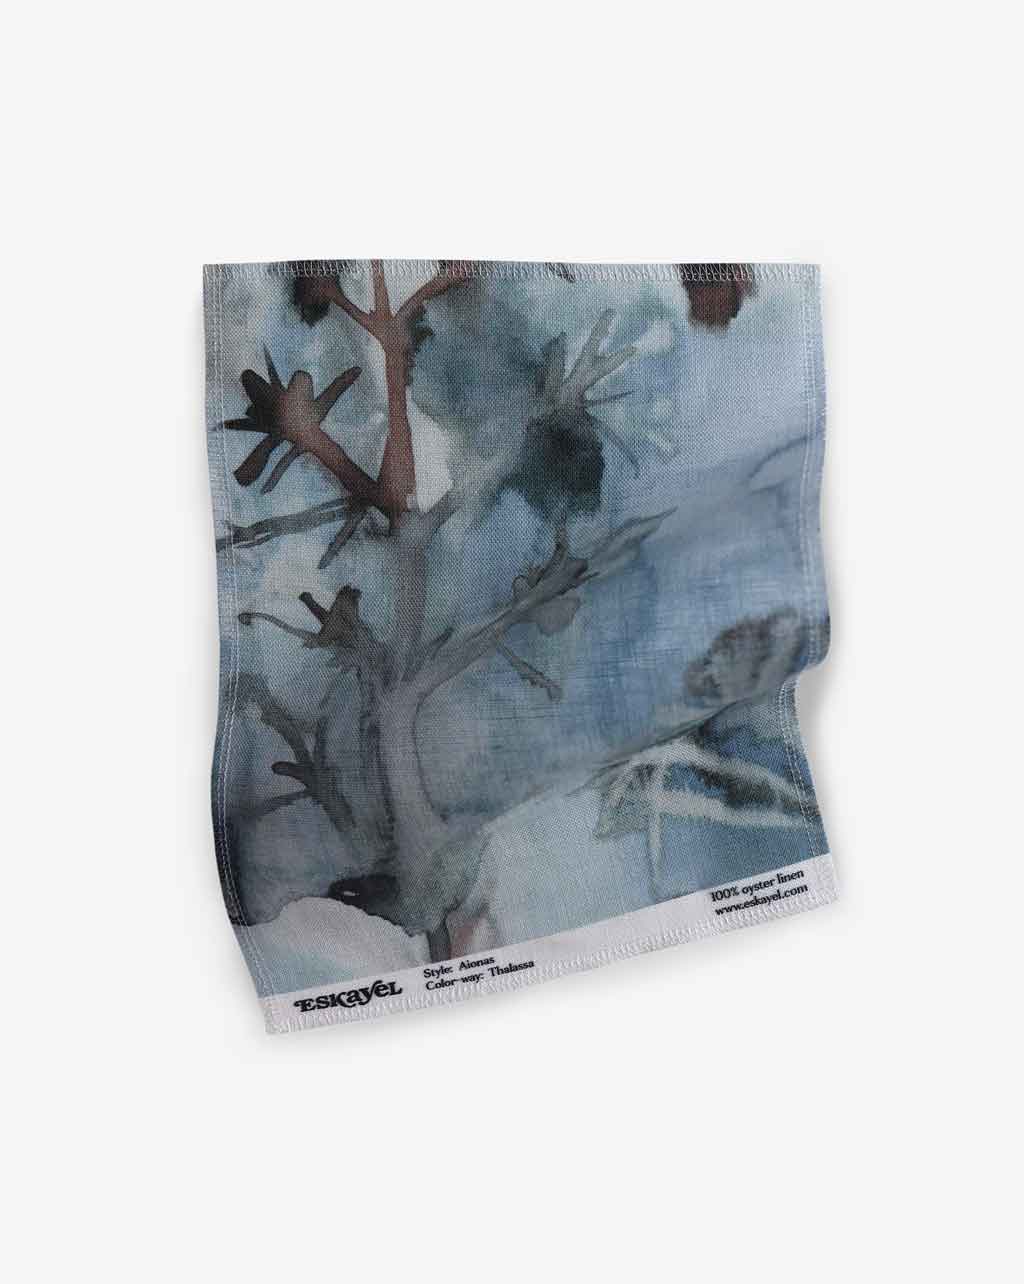 A watercolor painting of a tree on a piece of Aionas Fabric with Thalassa wallpaper backdrop